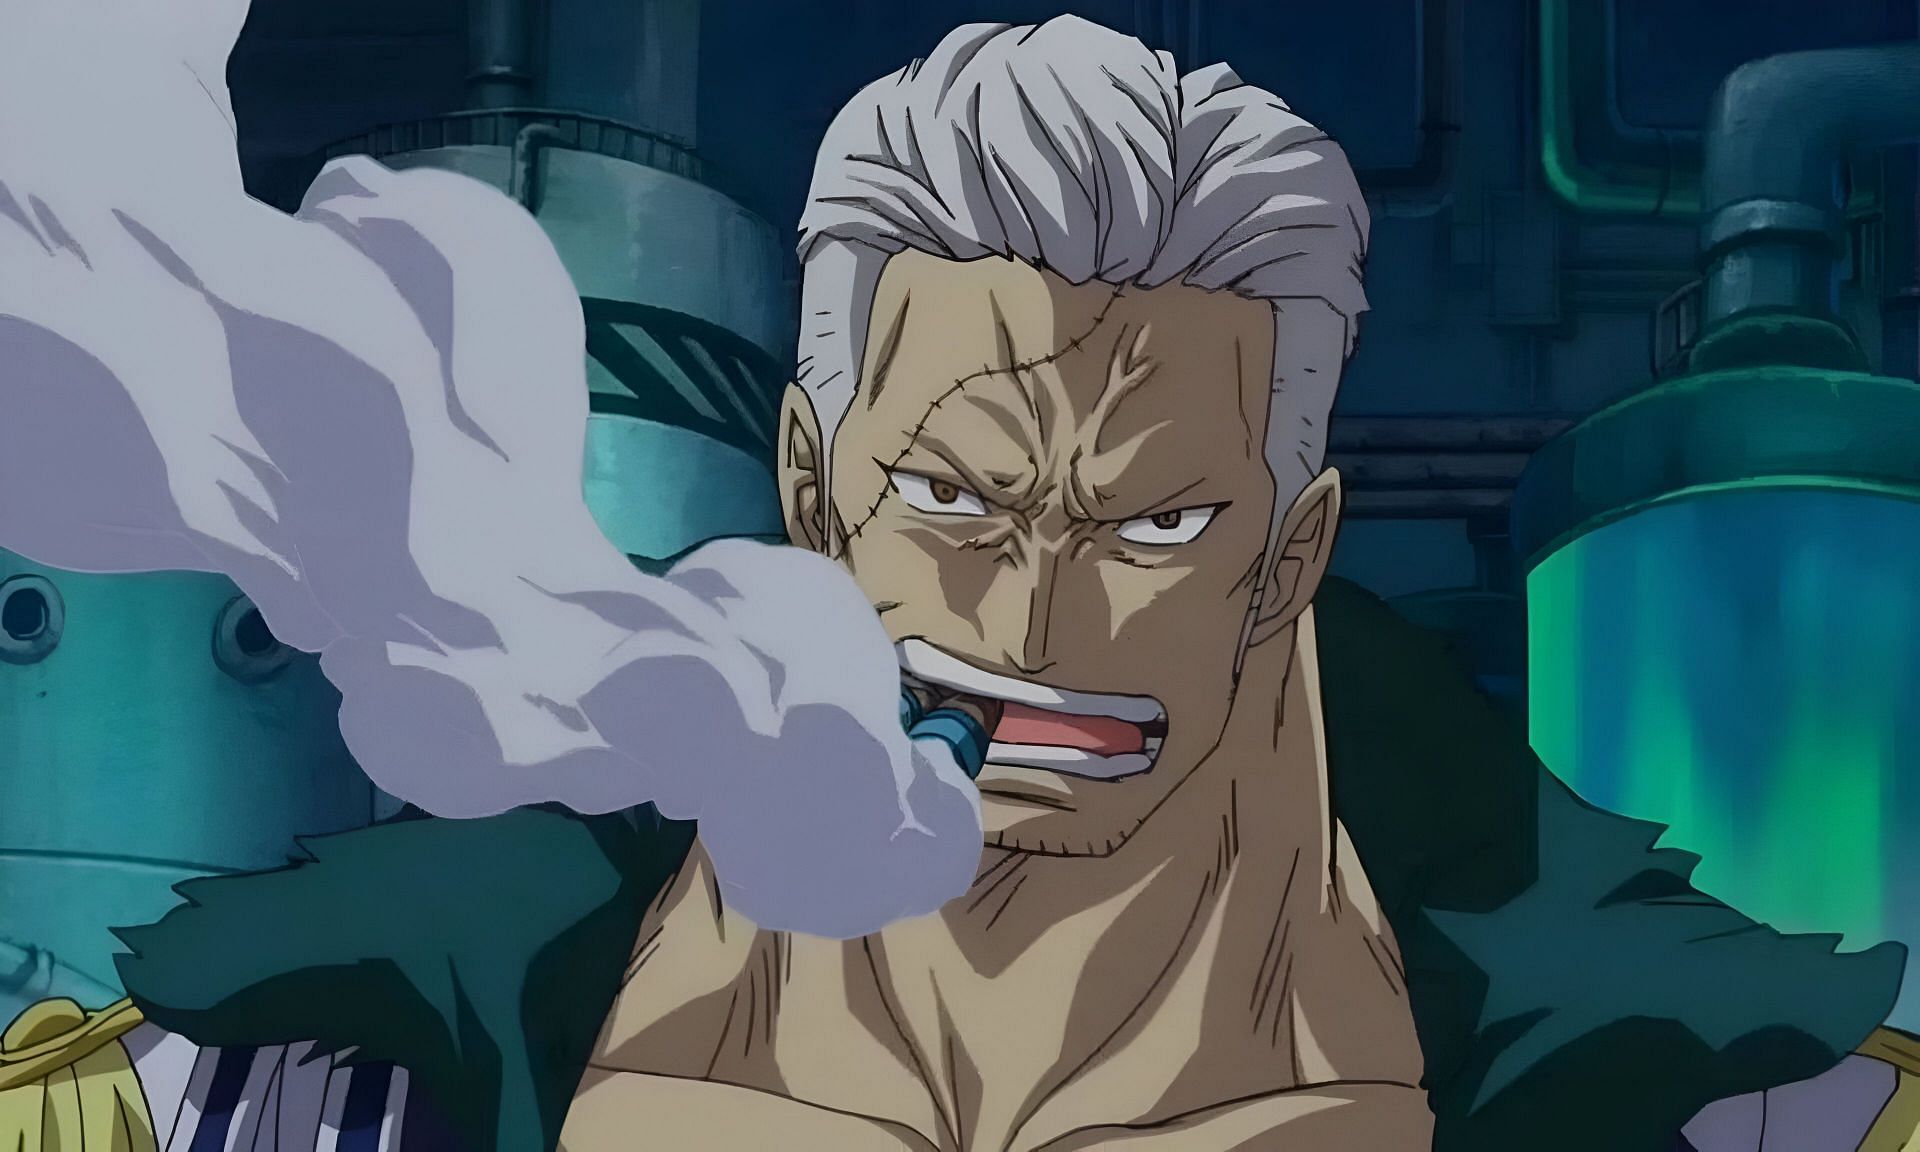 Smoker as seen in the anime (Image via Toei Animation)